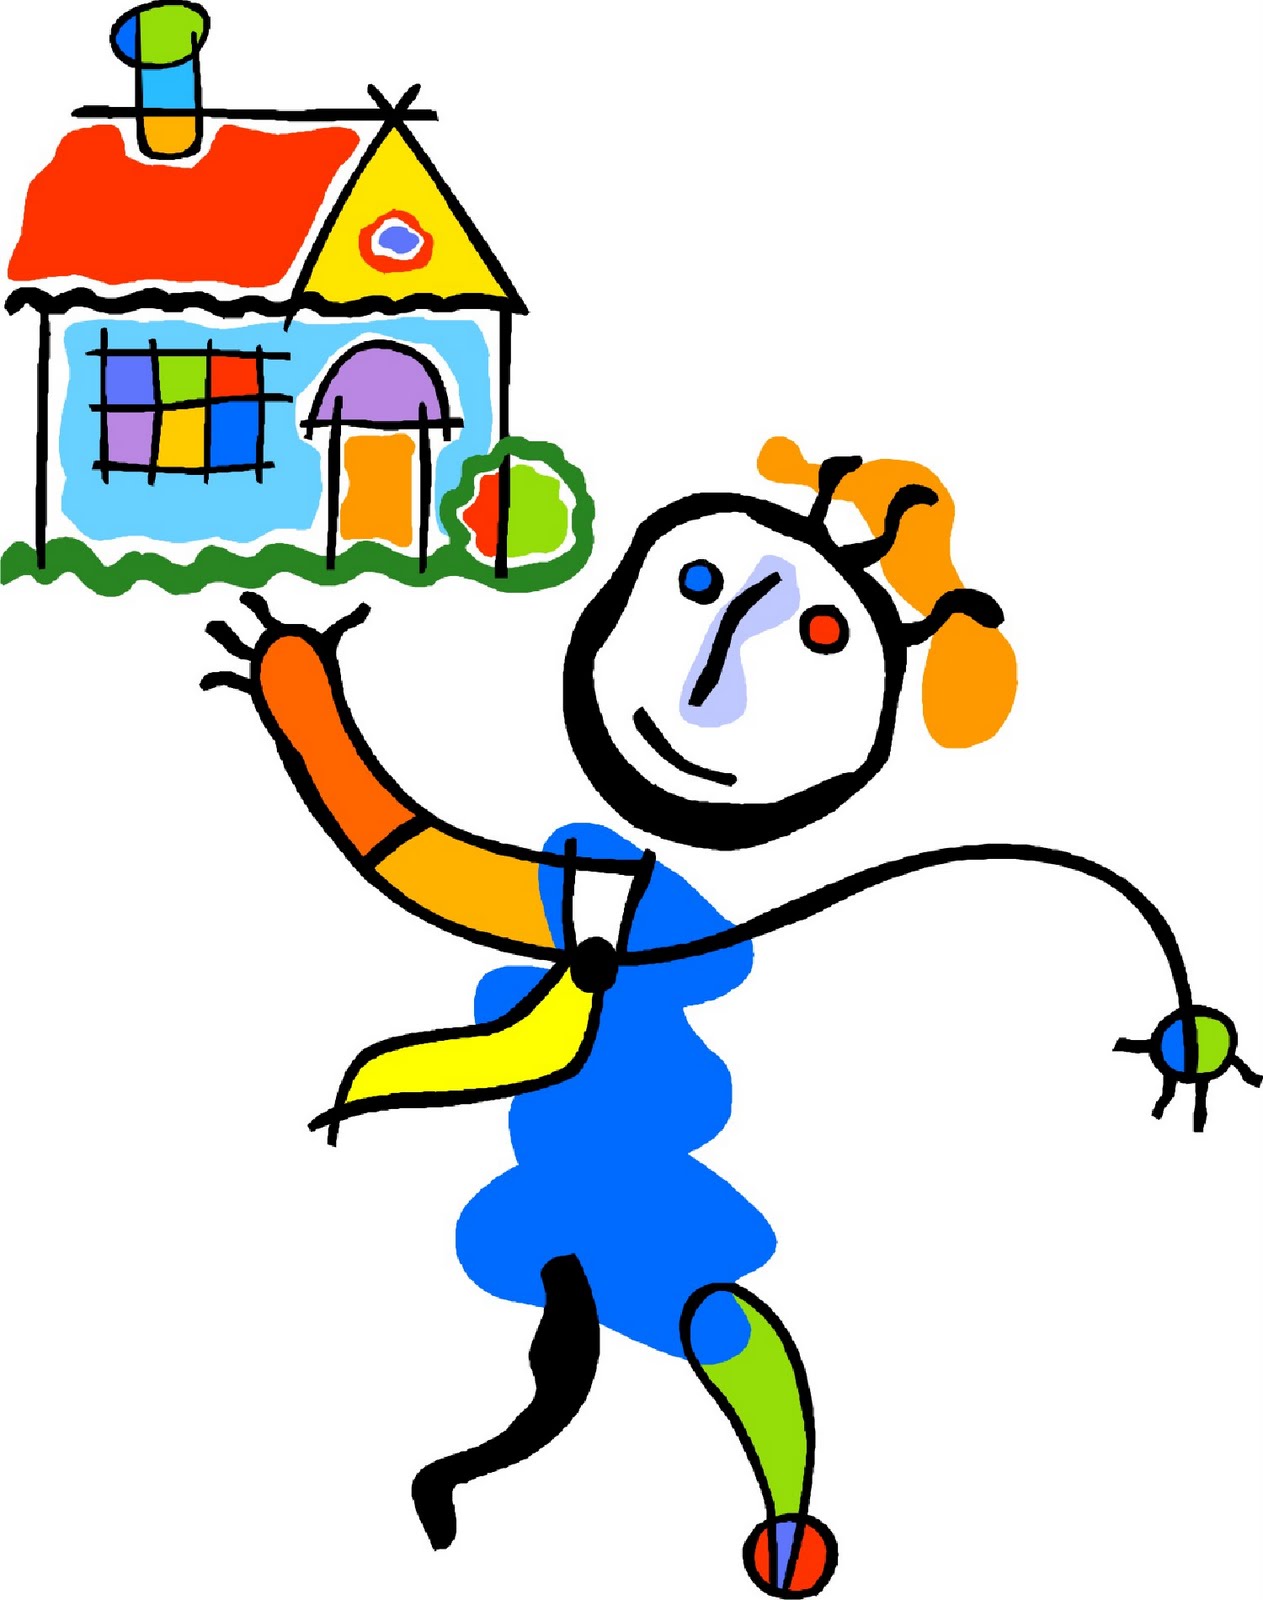 leaving-house-clipart-clip-art-library